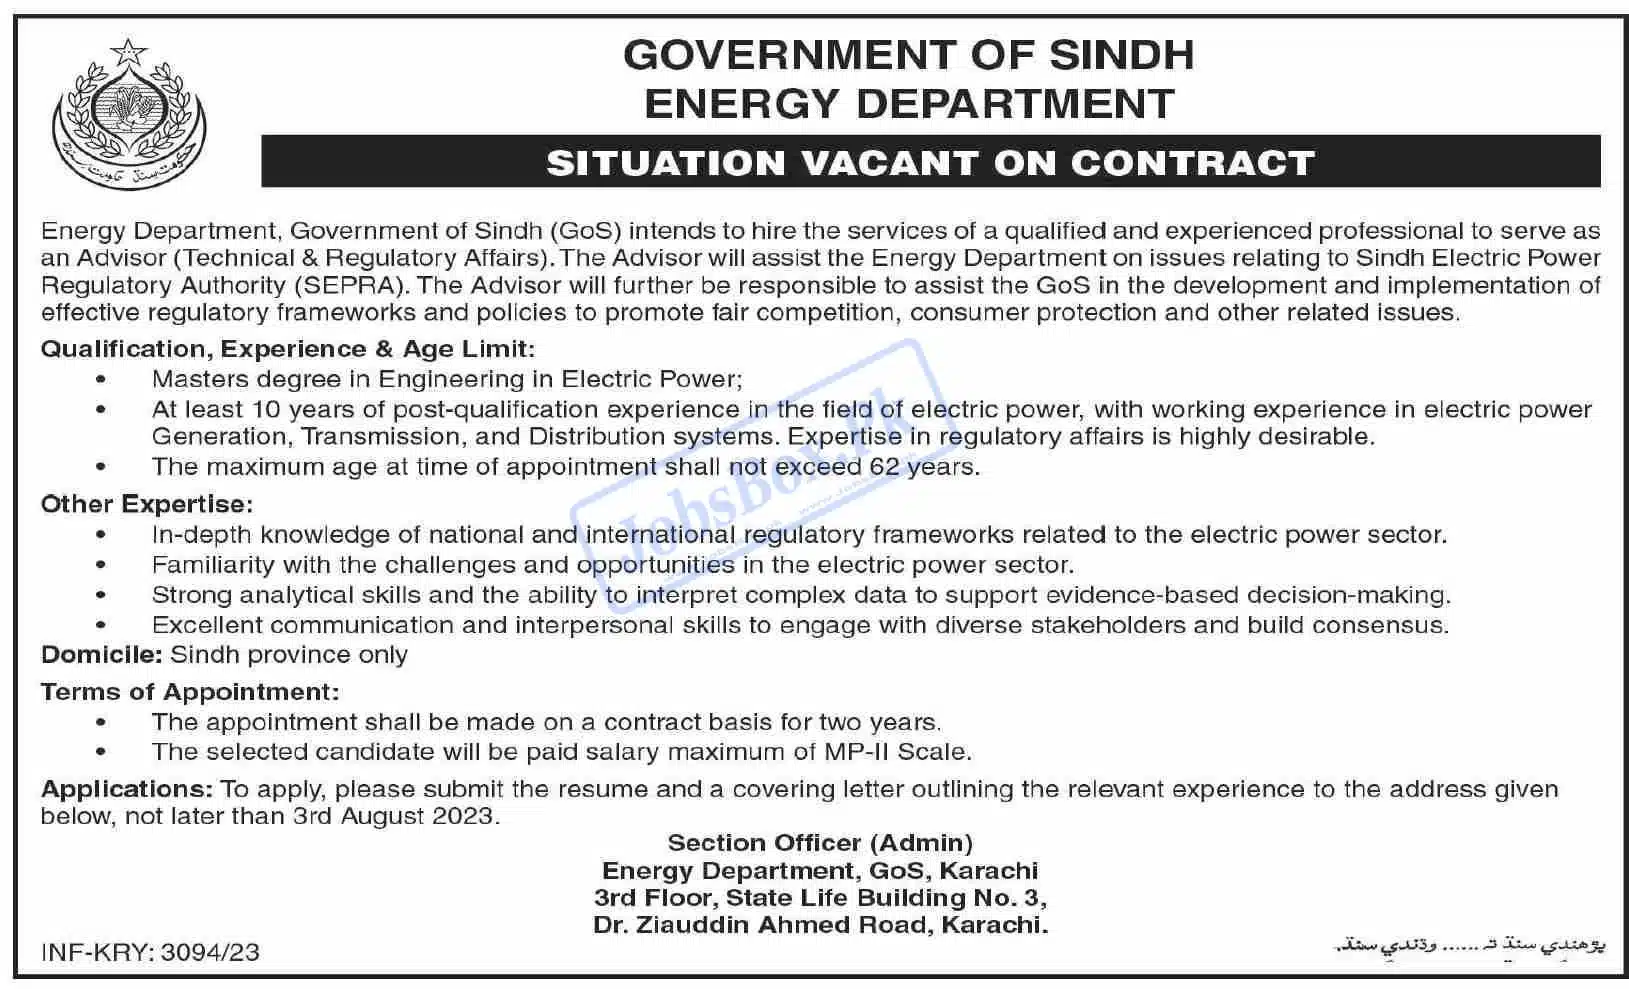 Energy Department Government of Sindh Jobs 2023 for Advisor